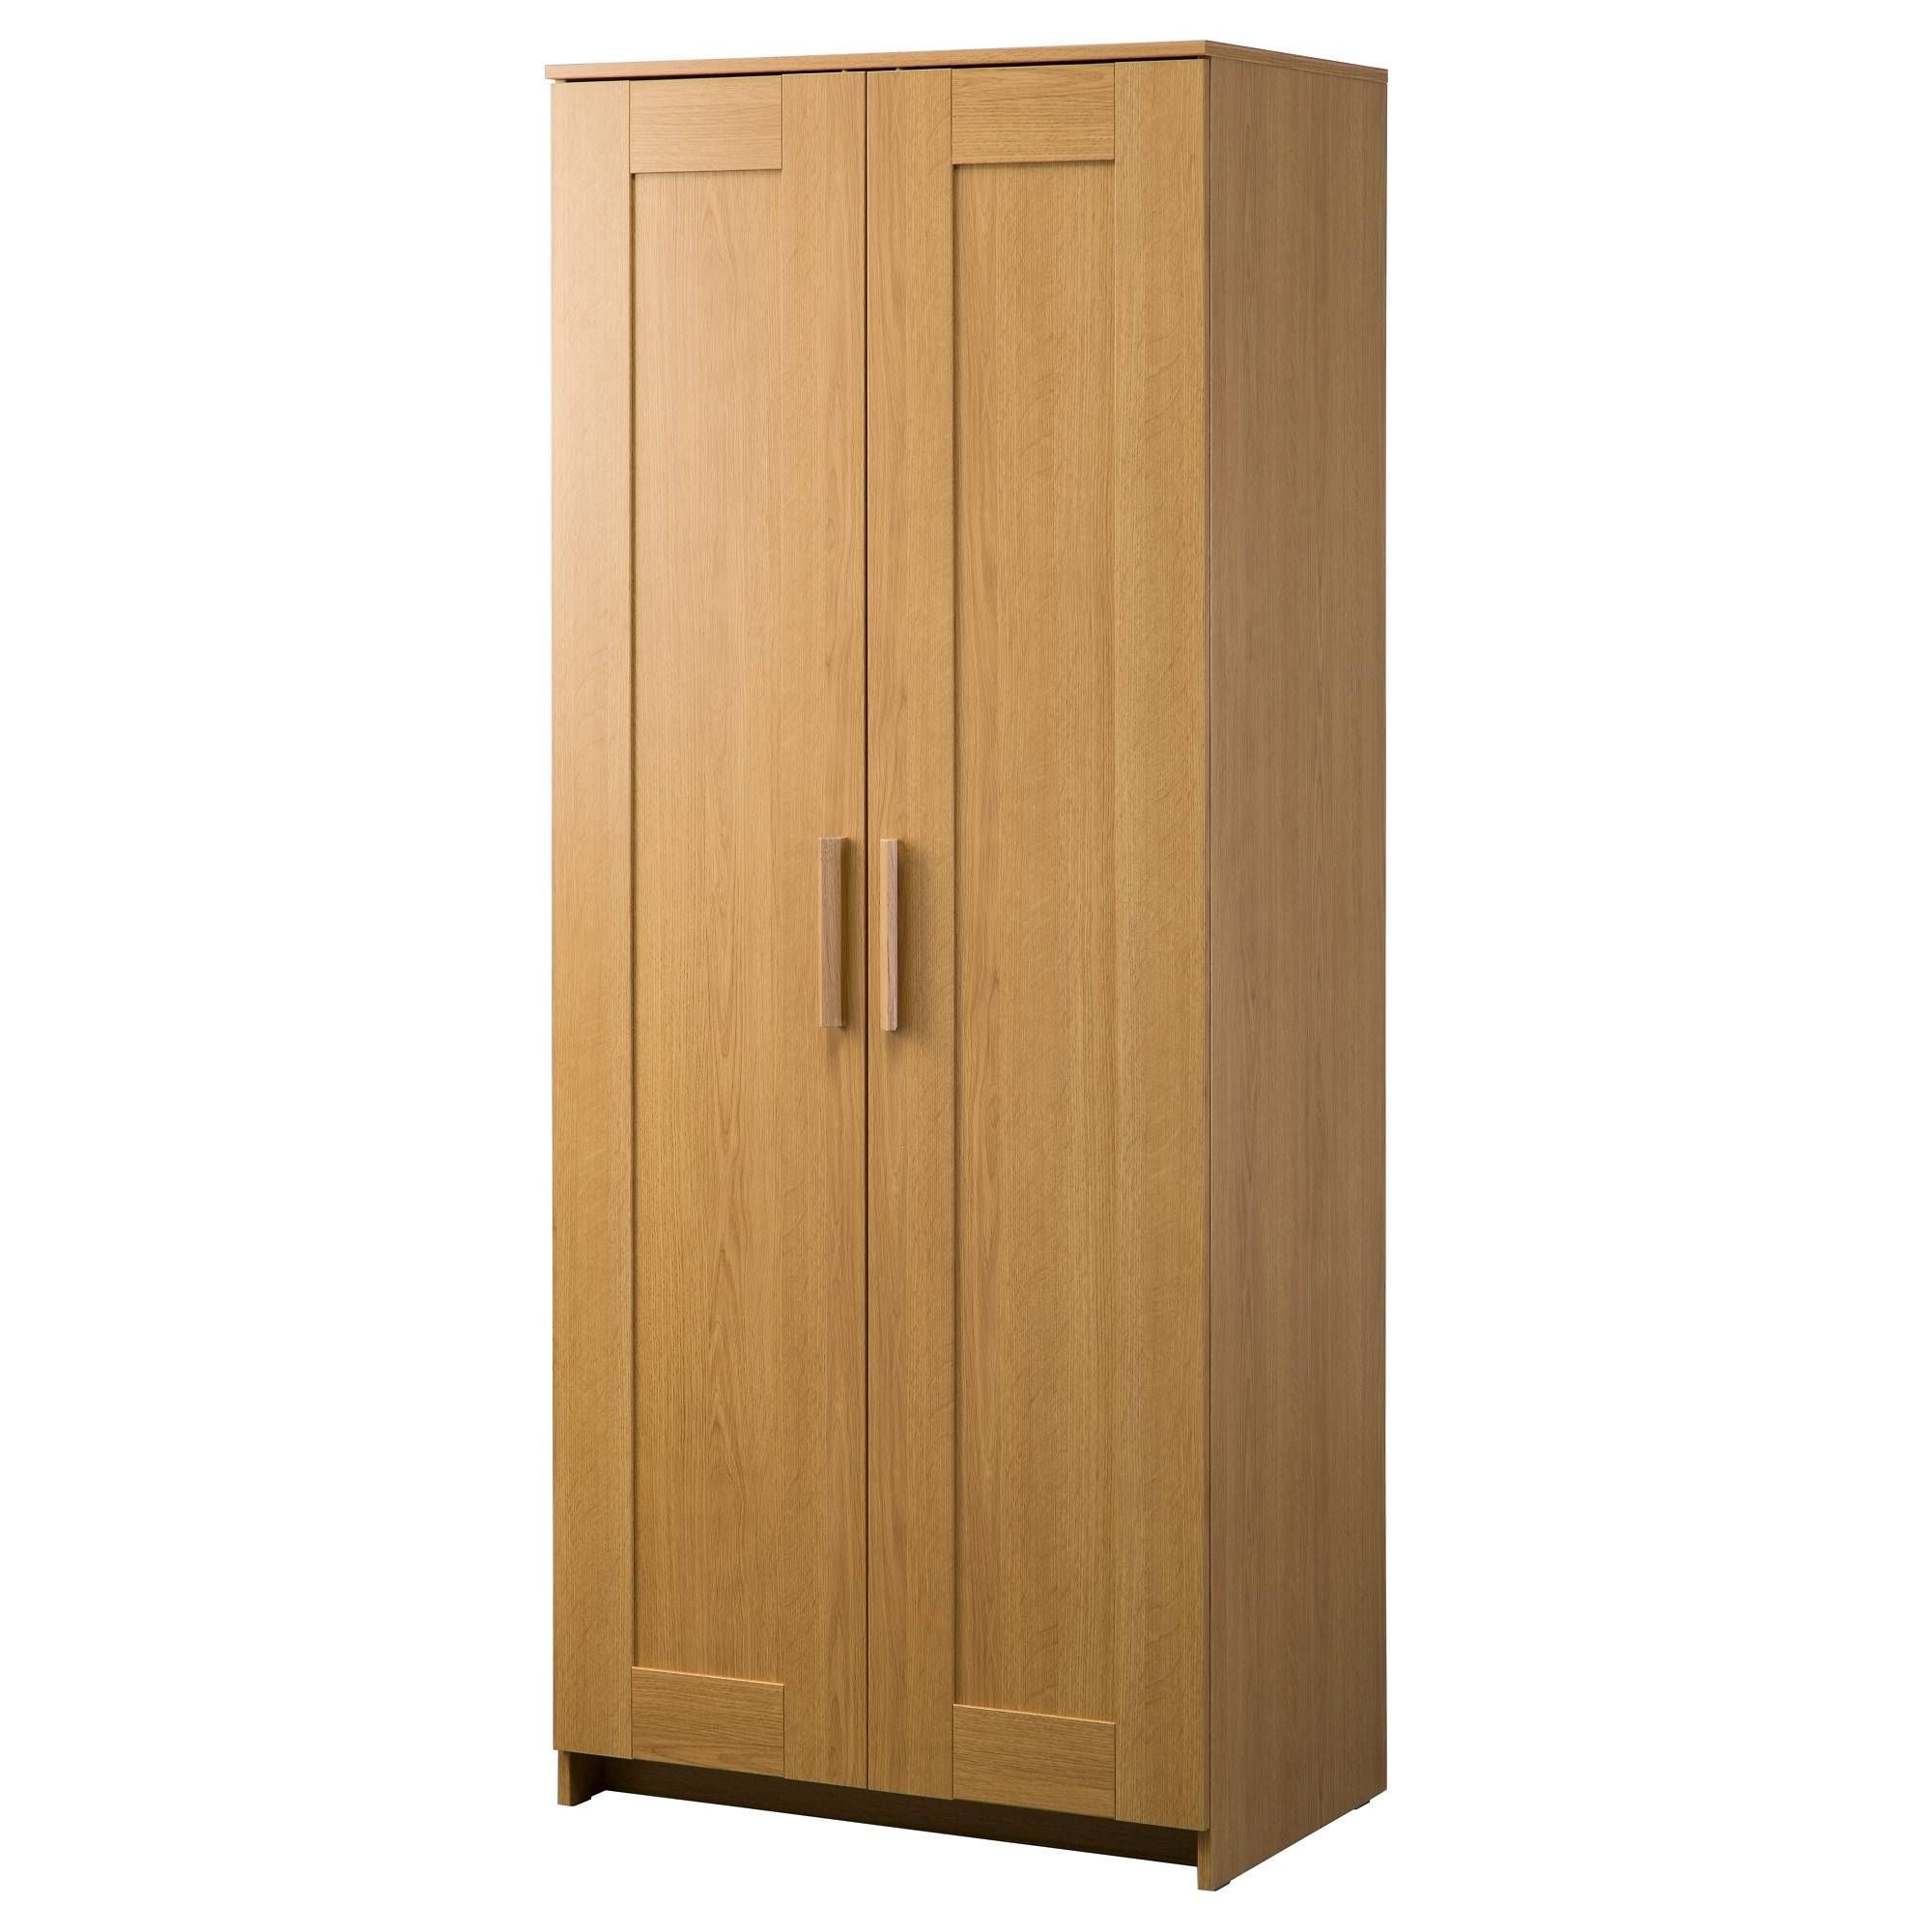 Wardrobes | Ikea Ireland – Dublin For 2 Door Wardrobe With Drawers And Shelves (View 10 of 30)